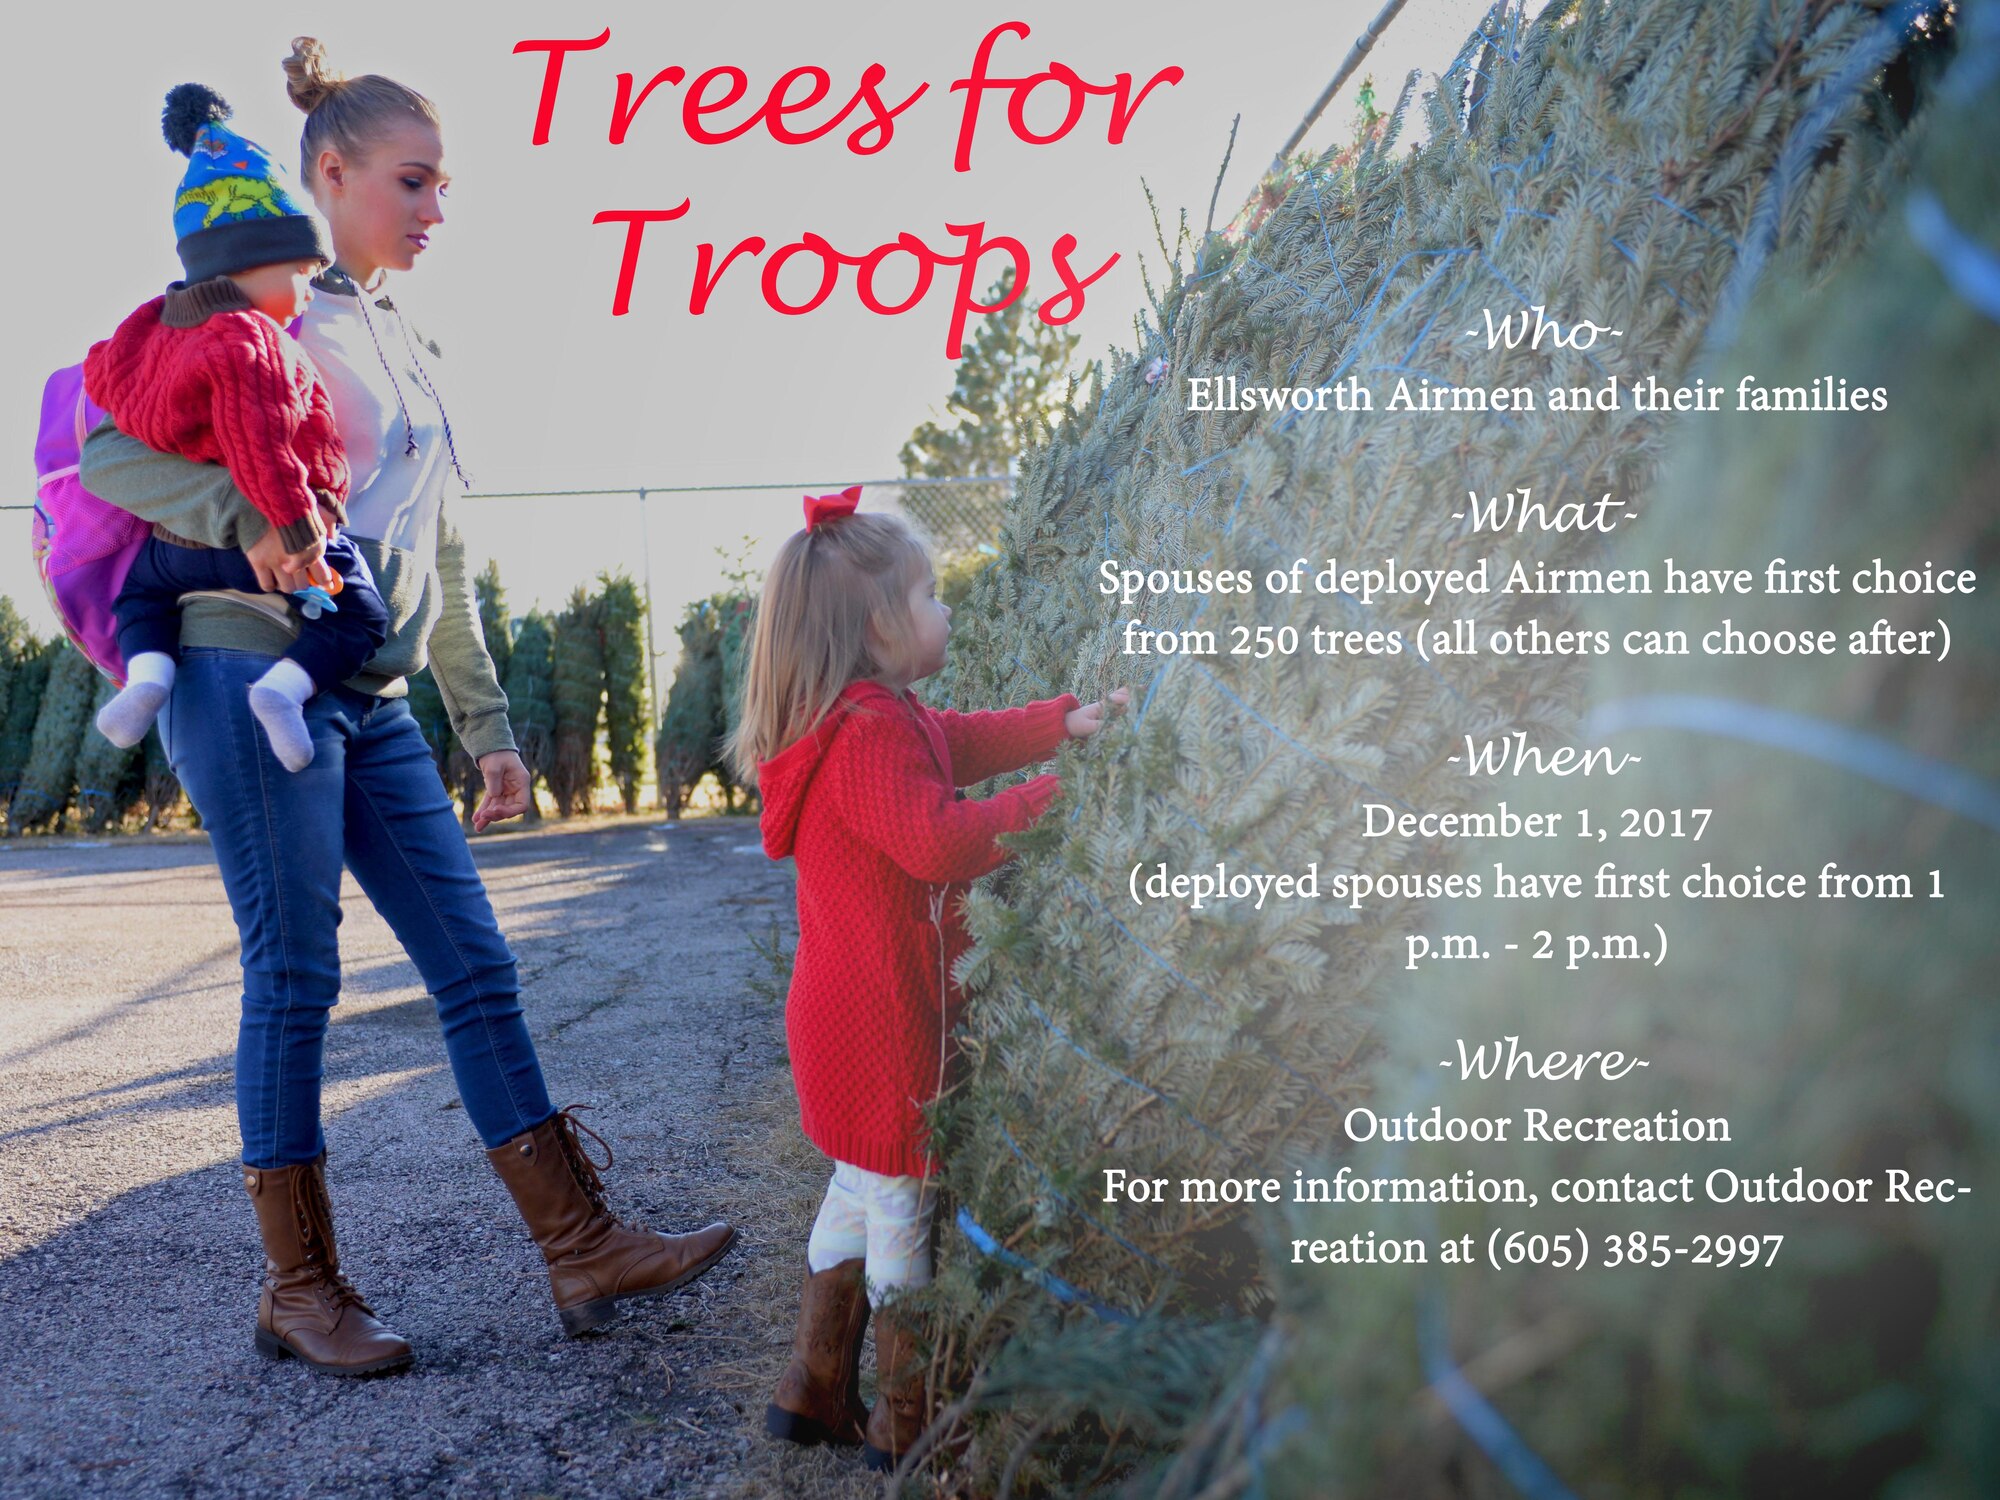 A family picks a Christmas tree during Ellsworth’s ninth annual Trees for Troops event Dec. 2, 2016. This year was Thompson’s first time participating in the program, and says it was a wonderful feeling being able to have a Christmas tree. (U.S. Air Force photo illustration by Senior Airman Denise M. Jenson)